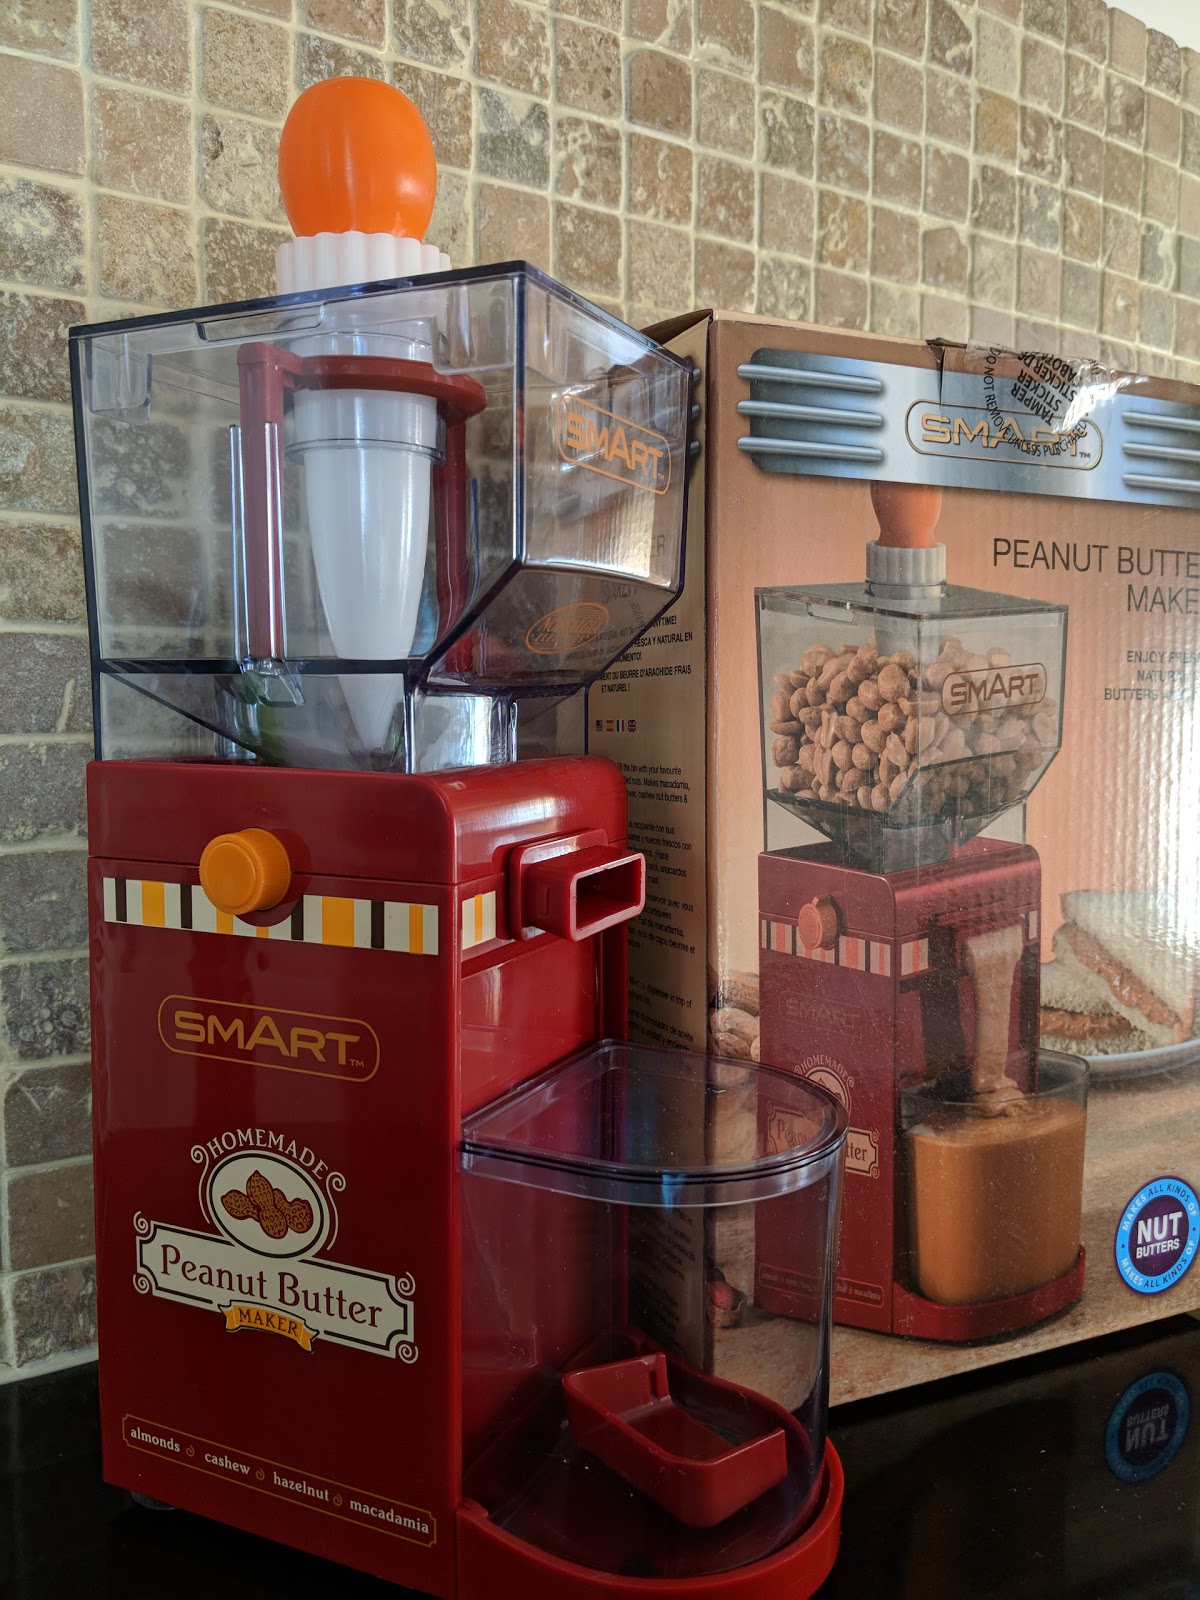 Review : The Peanut Butter Maker - This day I love.